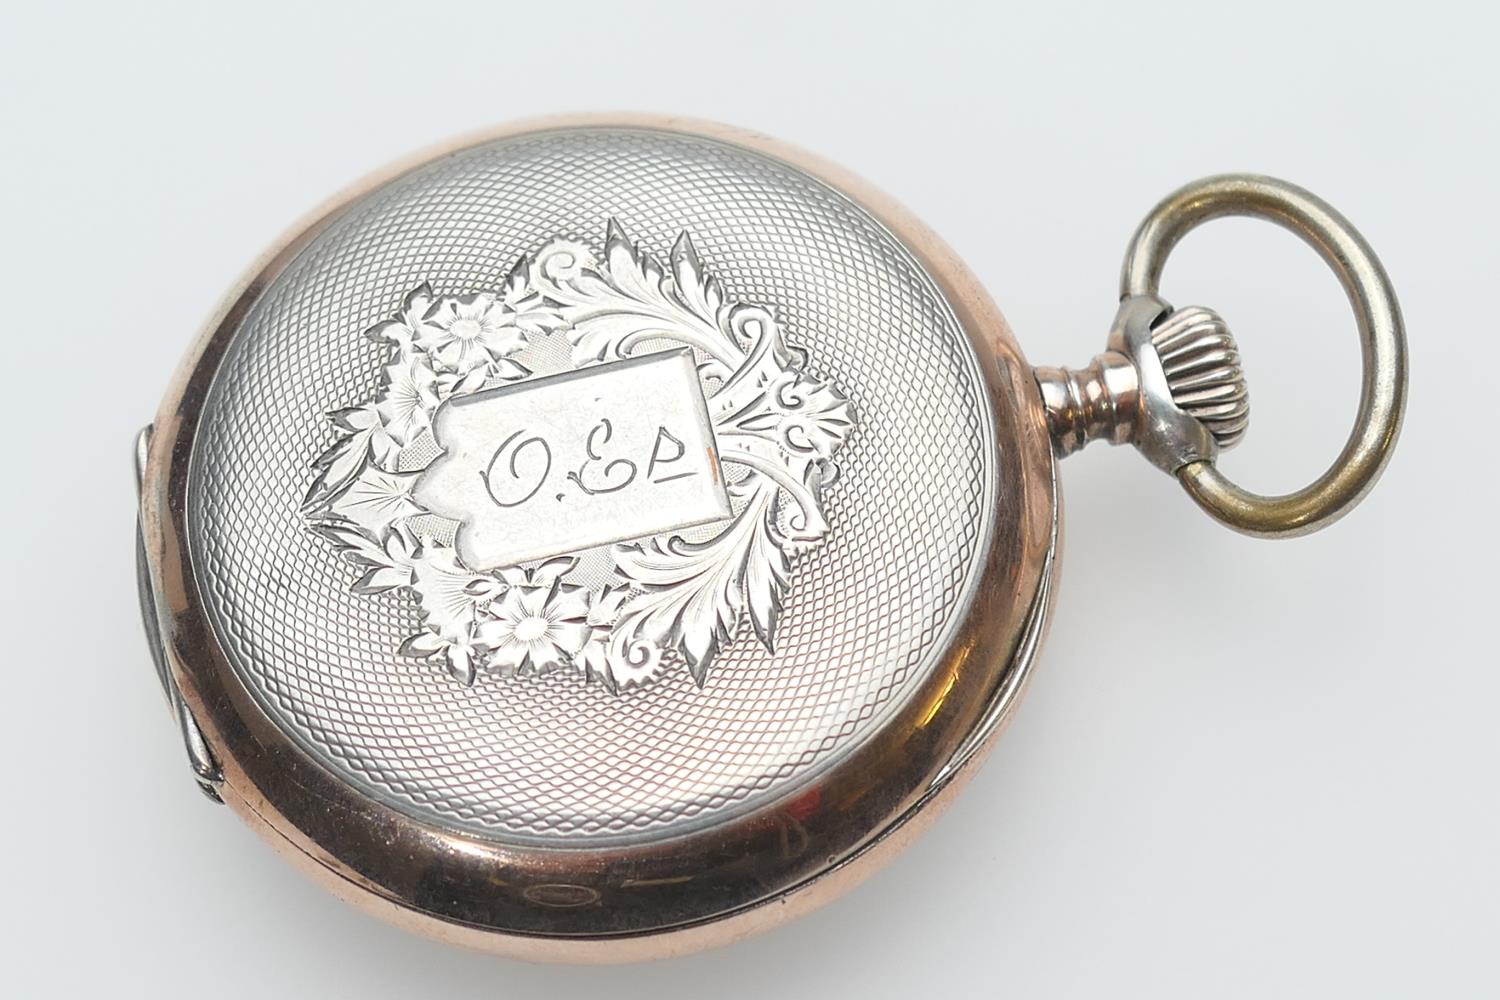 Omega 800 standard silver cased pocket watch, white dial with Arabic numerals, inner 24 hour - Image 2 of 3